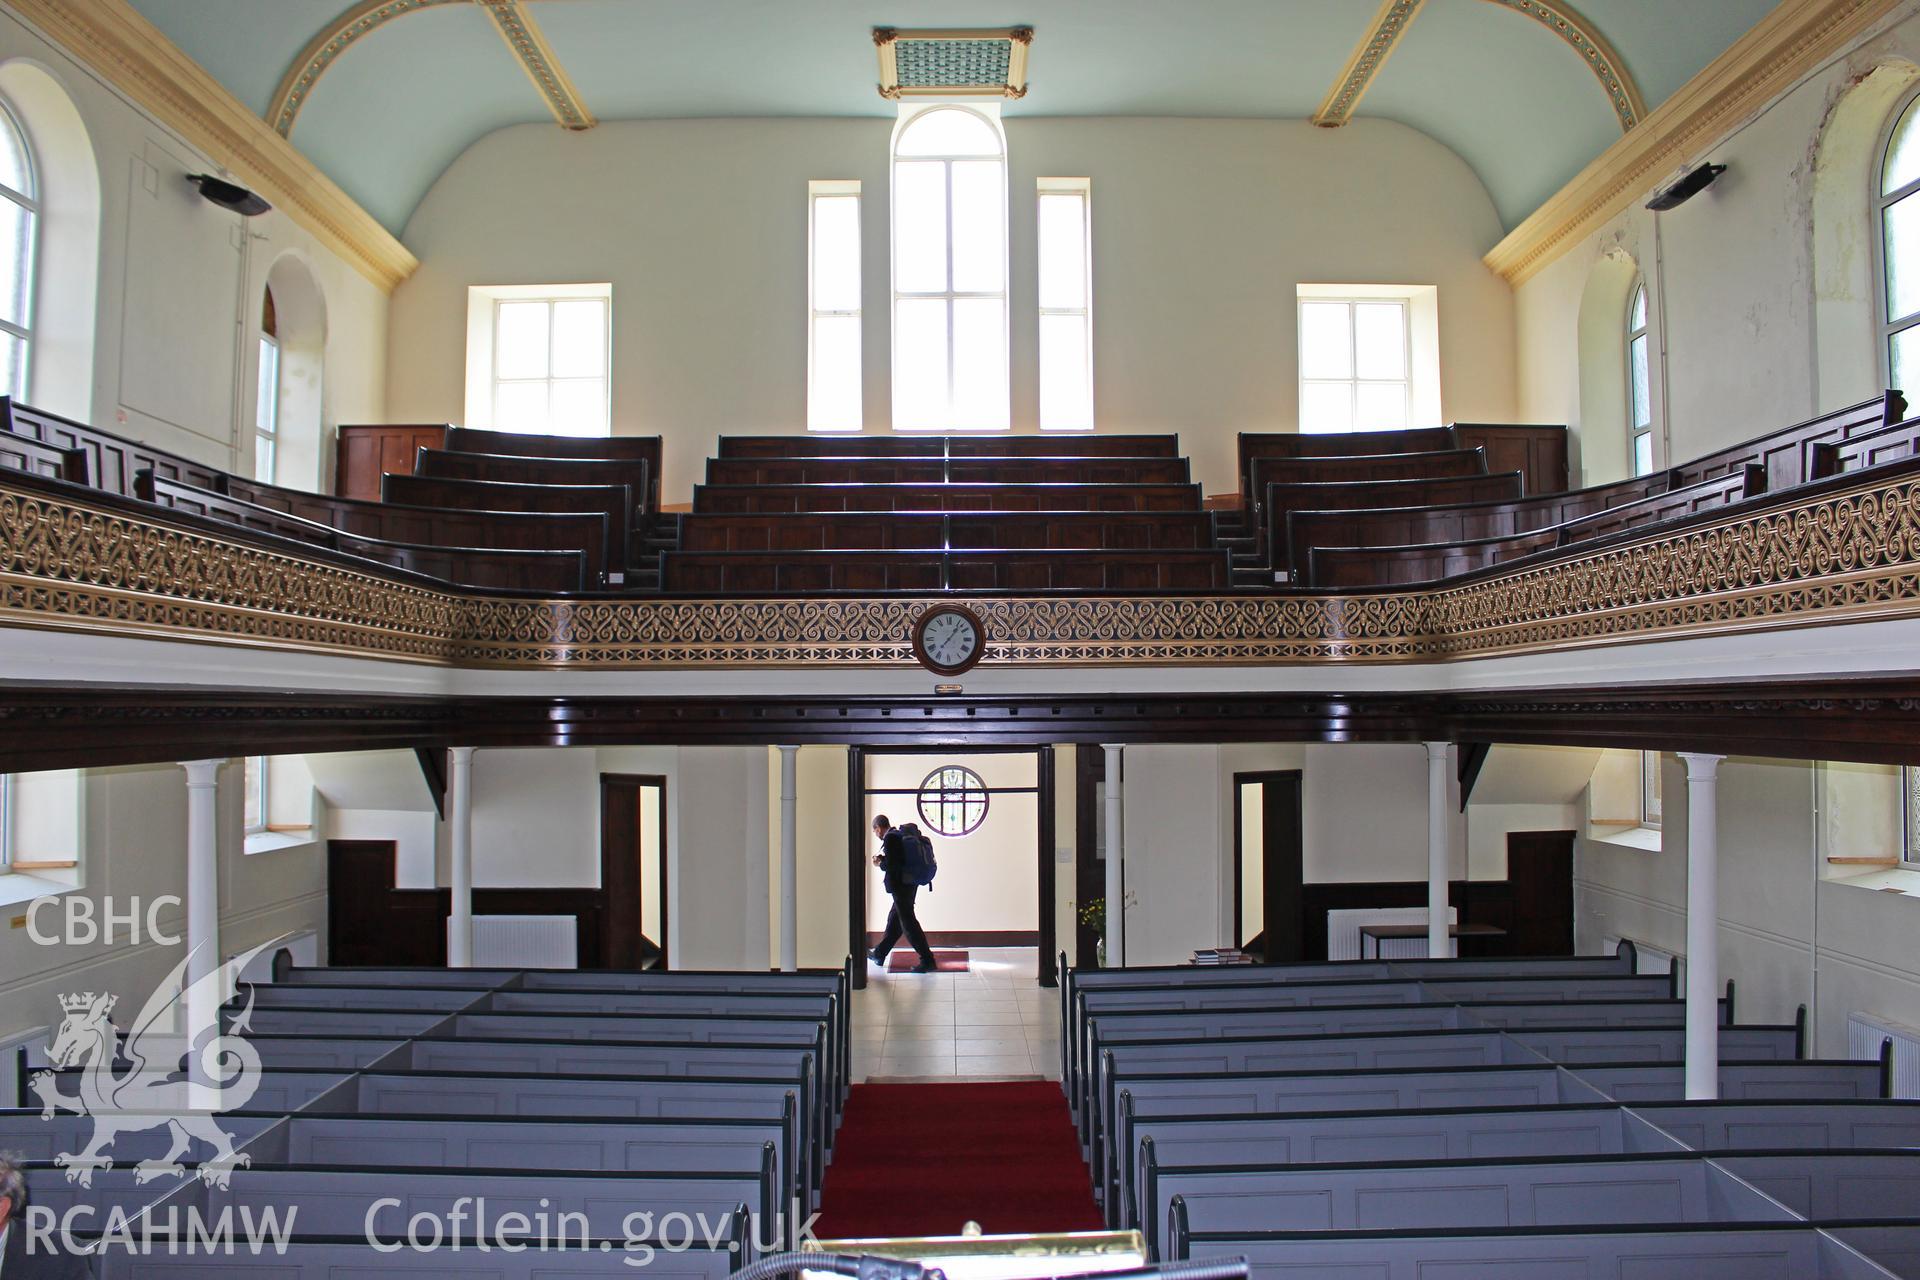 Colour photograph showing interior view looking from the pulpit towards the pews at Mynydd-Bach Independent Chapel, Treboeth, Swansea. Taken during photographic survey conducted by Sue Fielding on 13th May 2017.